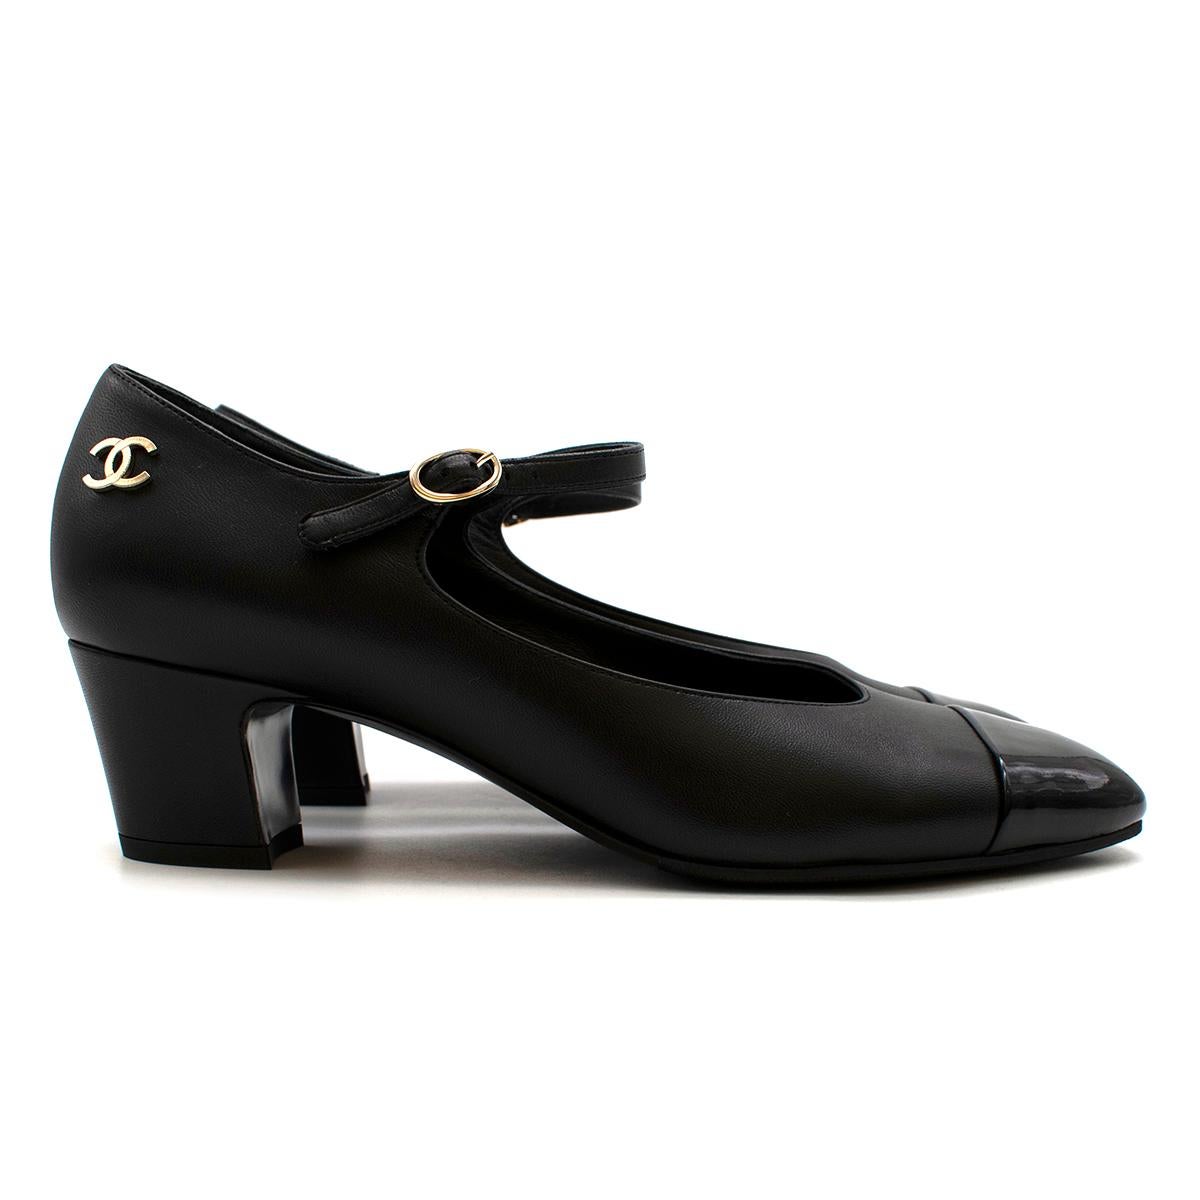 Chanel Black Leather and Patent Pumps 

- Classic Chanel black leather pump with patent toe
- Block heel for comfort and style
- Gold CC logo detailing
- Delicate ankle strap with small gold buckle

Made in Italy

PLEASE NOTE, THESE ITEMS ARE